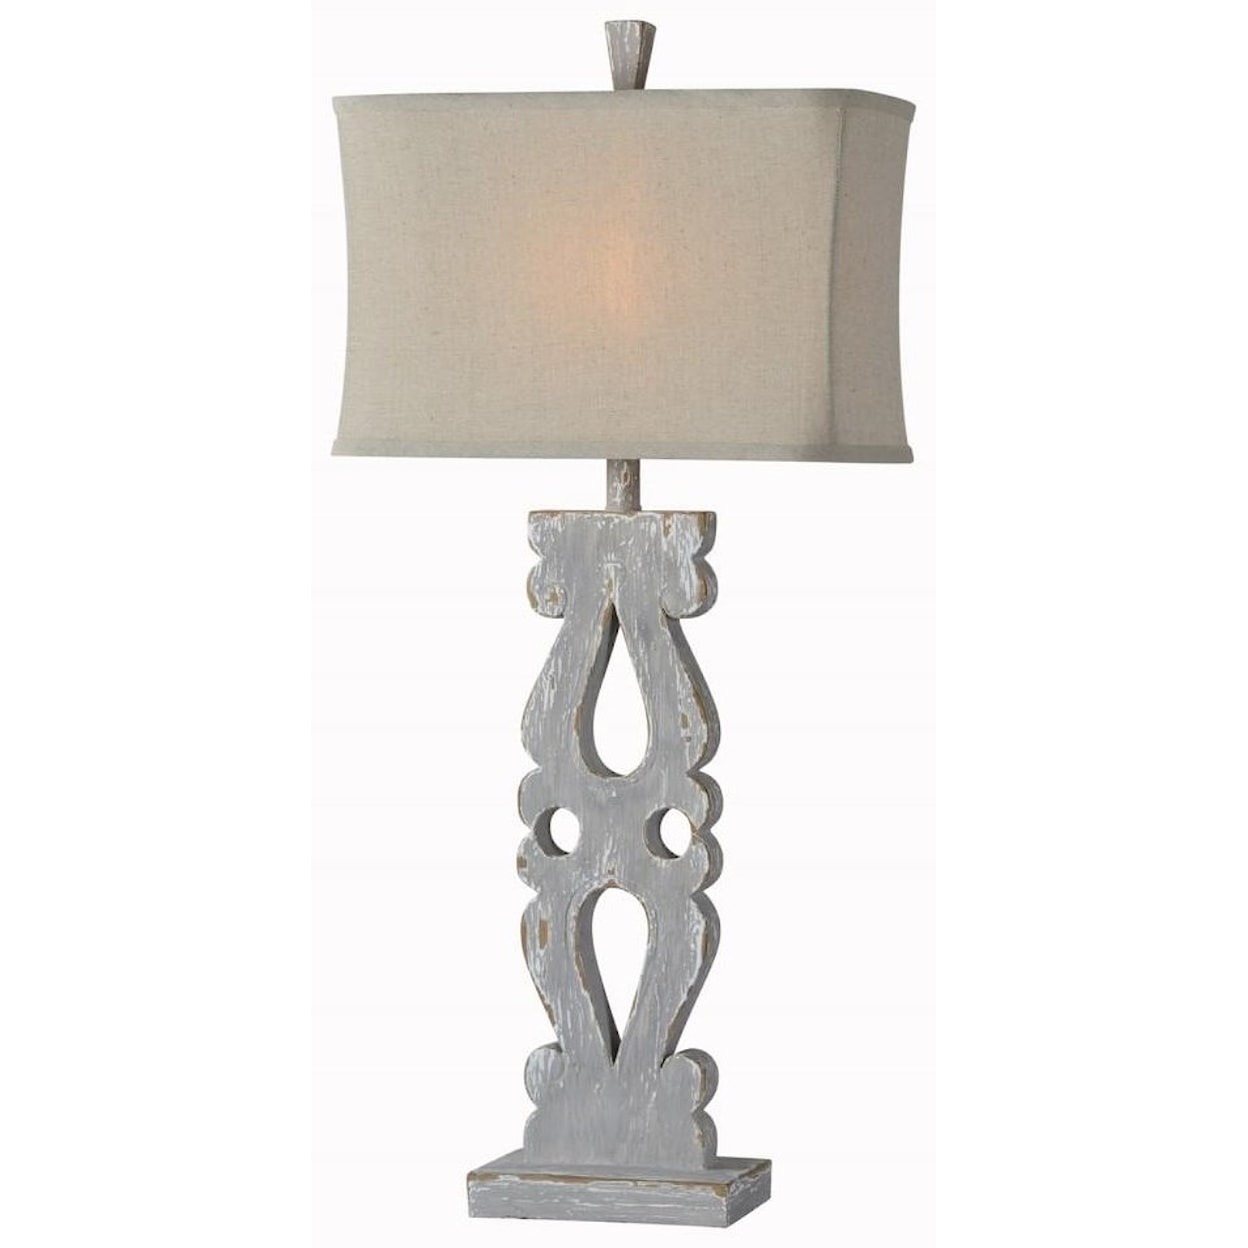 Forty West Designs Lamps Lorelei Table Lamp